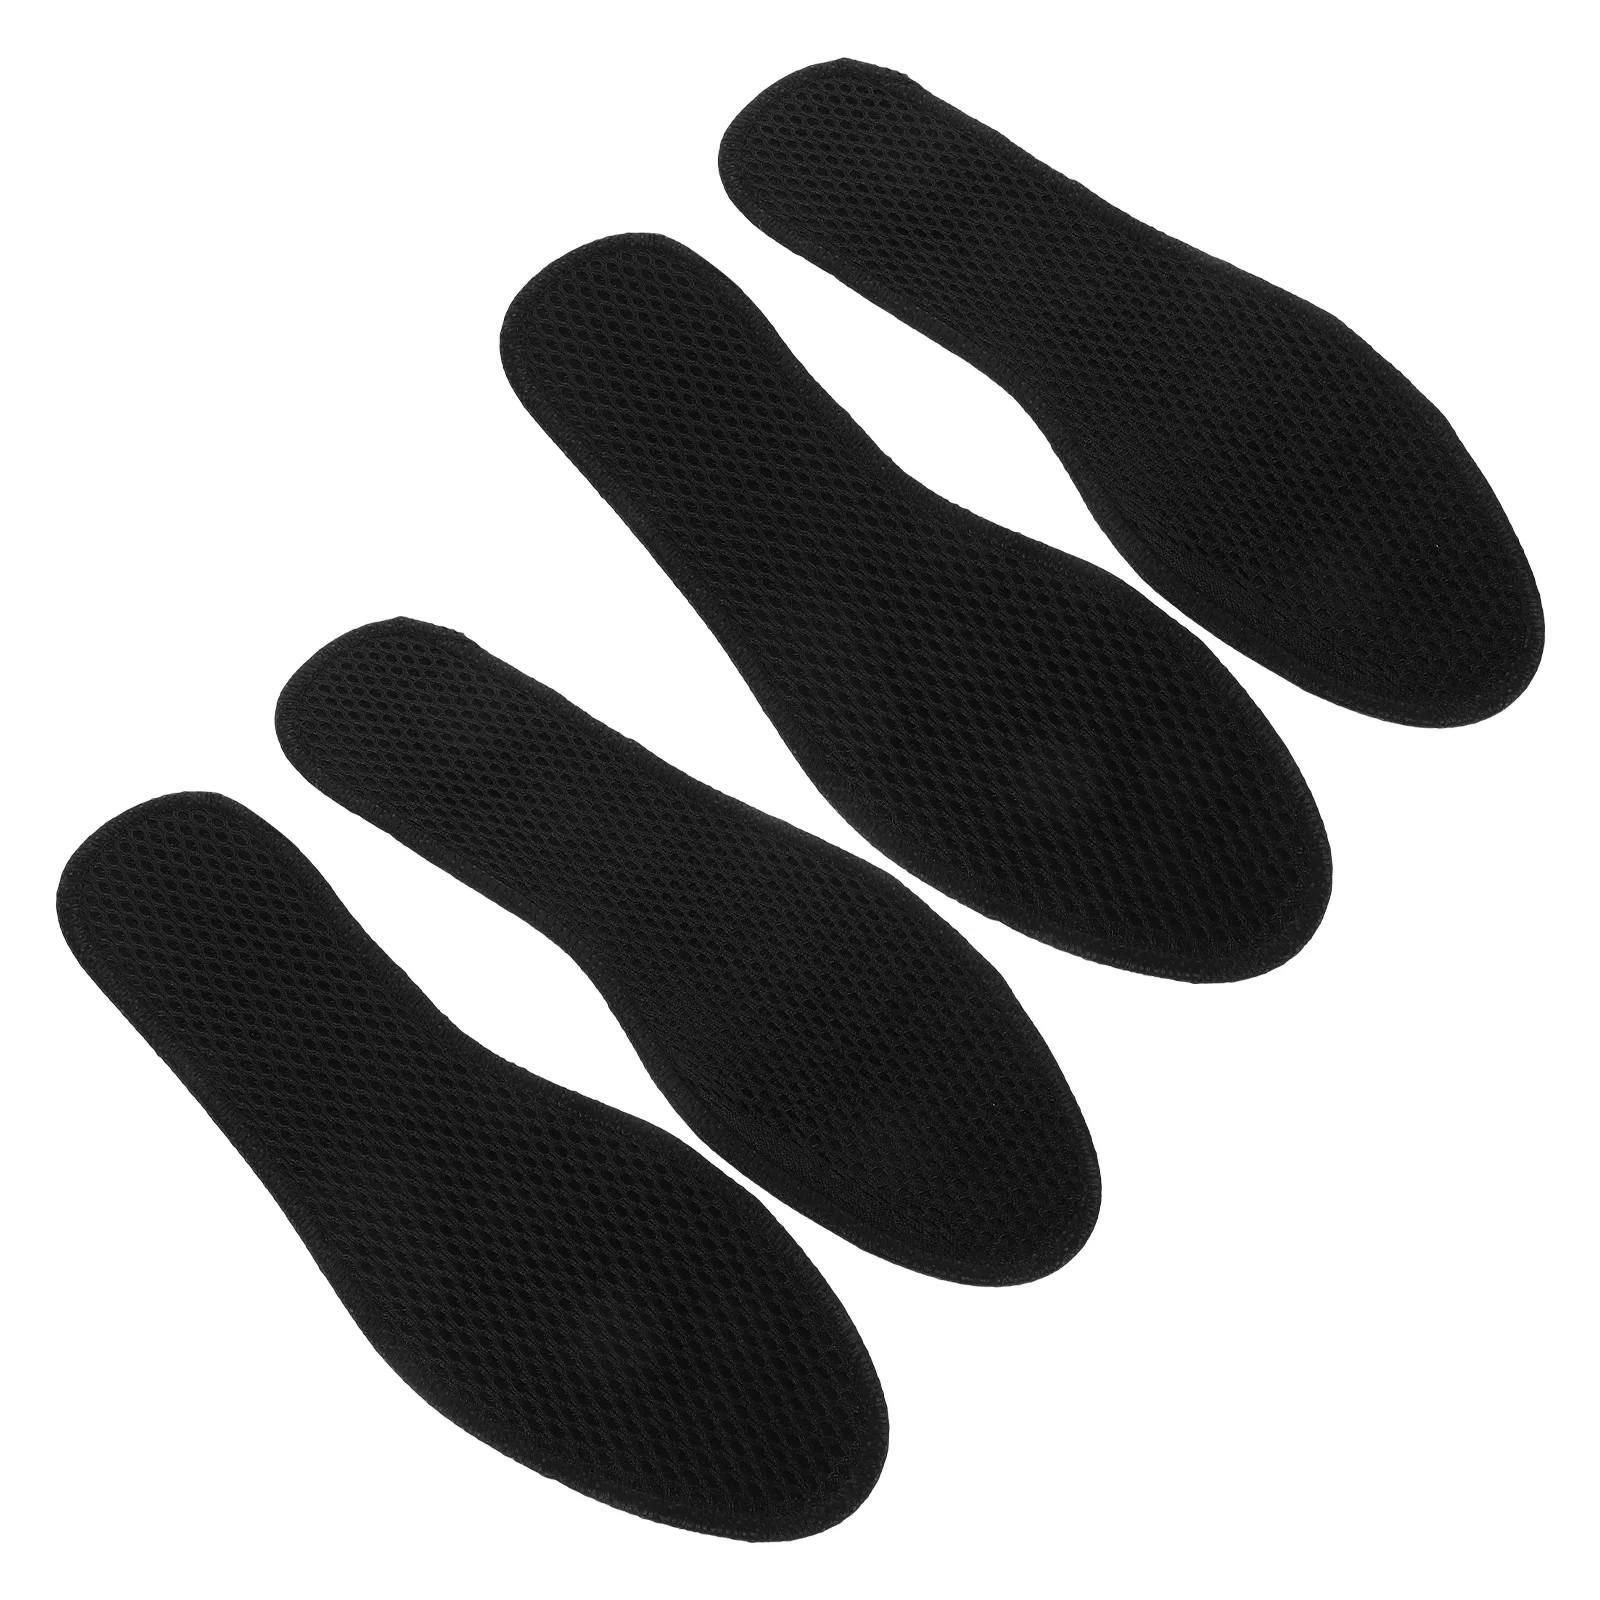 

Bamboo Charcoal Shoe Insoles Mesh Insoles Sweat Absorbent Anti Odor Shoe Inserts Pads Men Women Sports Running Black 2 Pairs